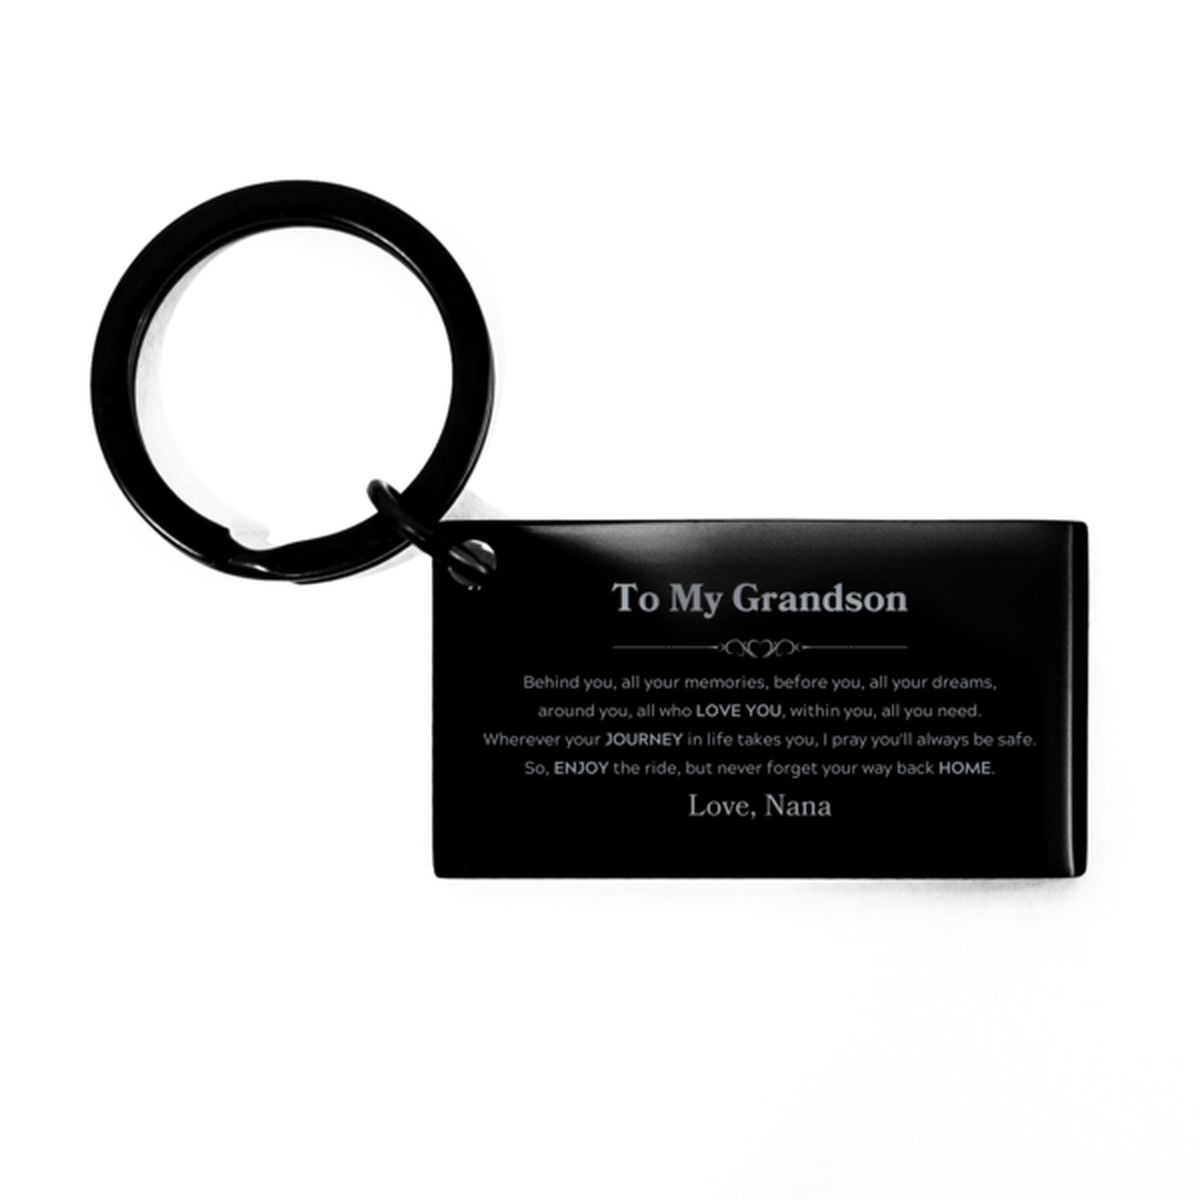 To My Grandson Graduation Gifts from Nana, Grandson Keychain Christmas Birthday Gifts for Grandson Behind you, all your memories, before you, all your dreams. Love, Nana